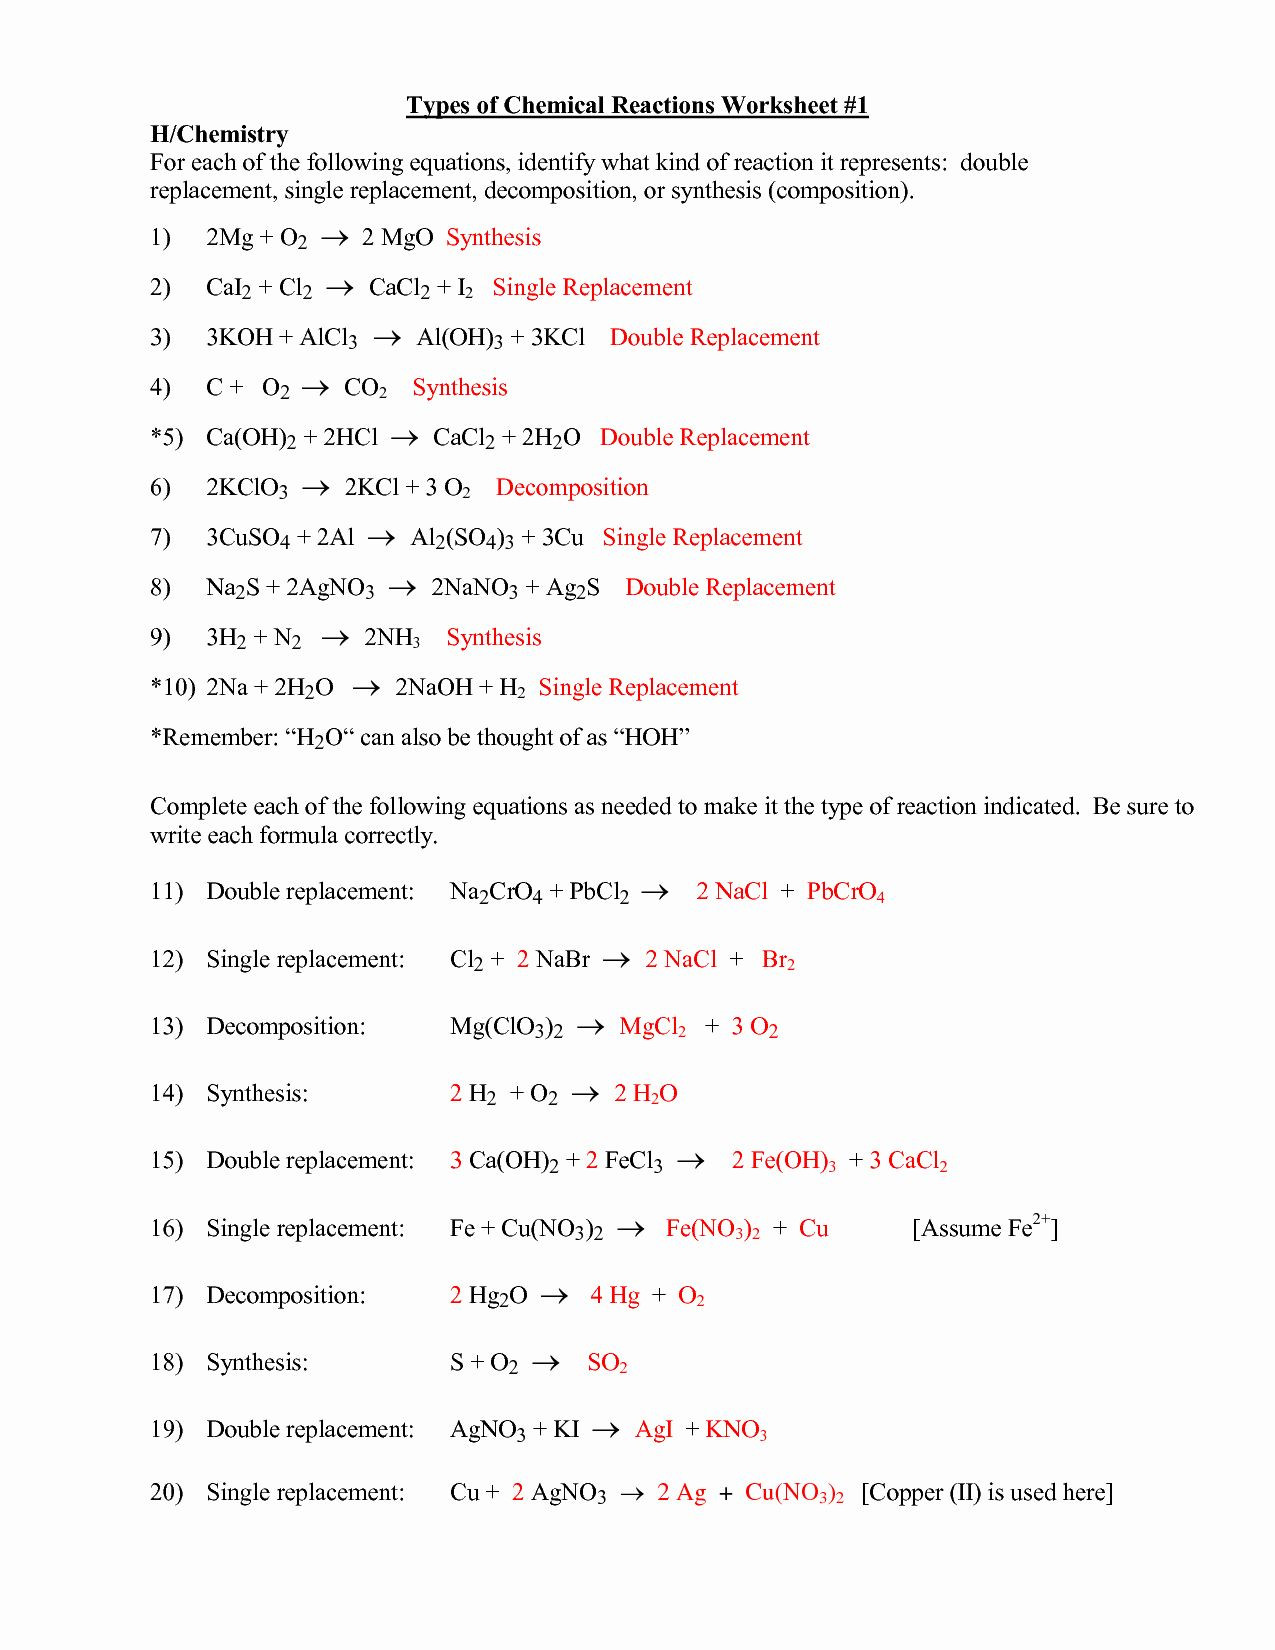 Types Of Reactions Worksheet Answers Classifying Chemical Reactions Worksheet Answers New 16 Best